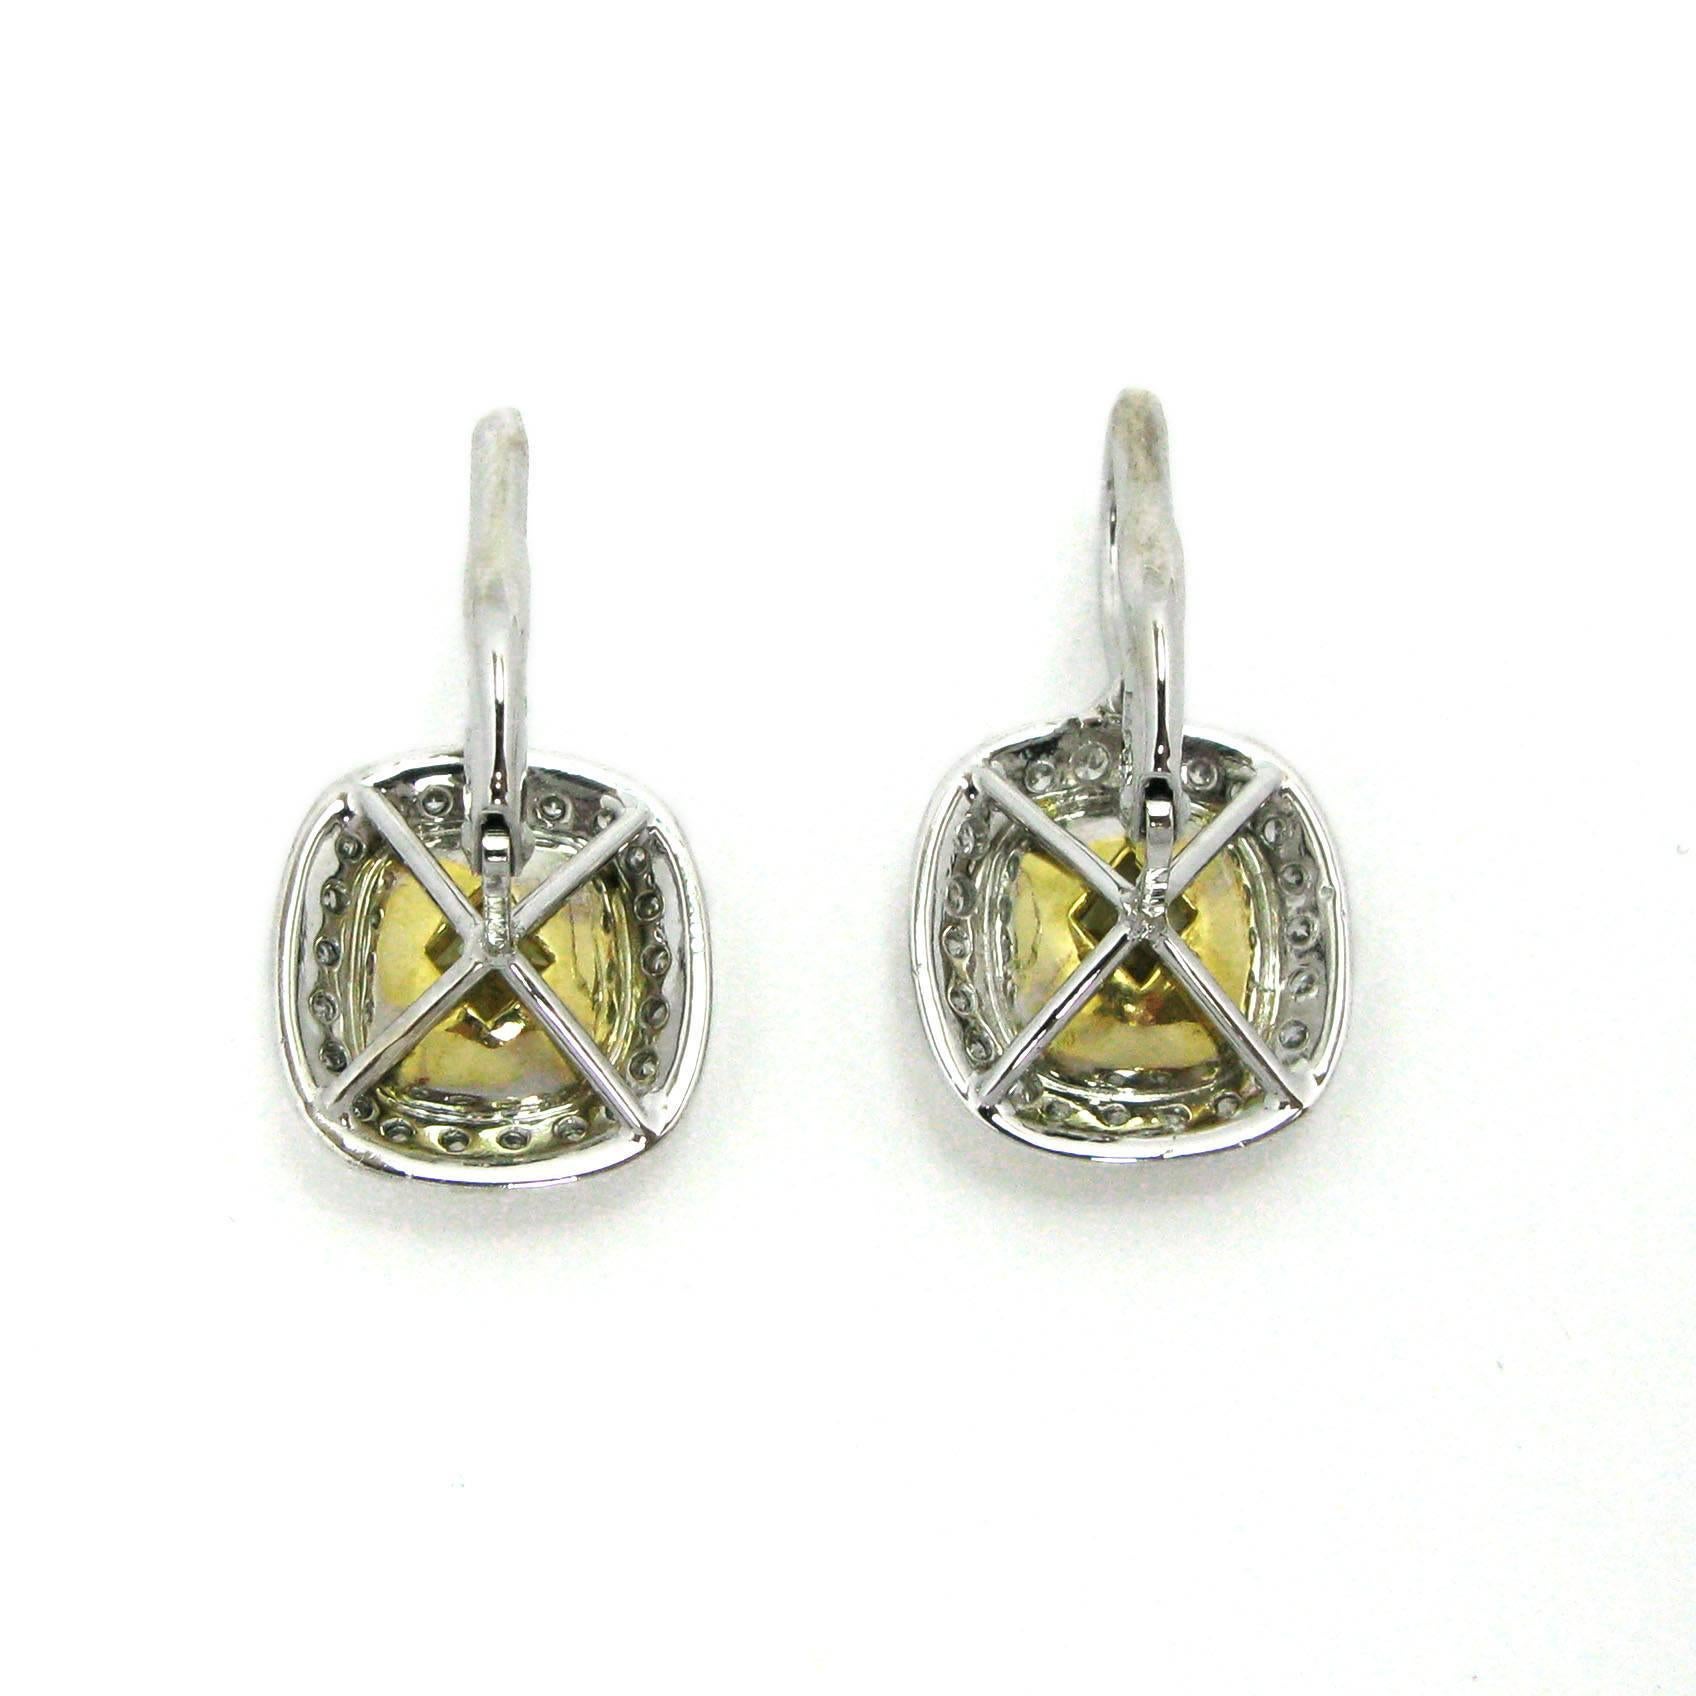 Add a little sunshine to your outfit with these gorgeous yellow and white diamond drop earrings. These earrings feature a 2.01 carat Fancy Light Yellow diamond with SI1 clarity and a 2.08 carat Fancy Yellow diamond with VS2 clarity. 
The two yellow